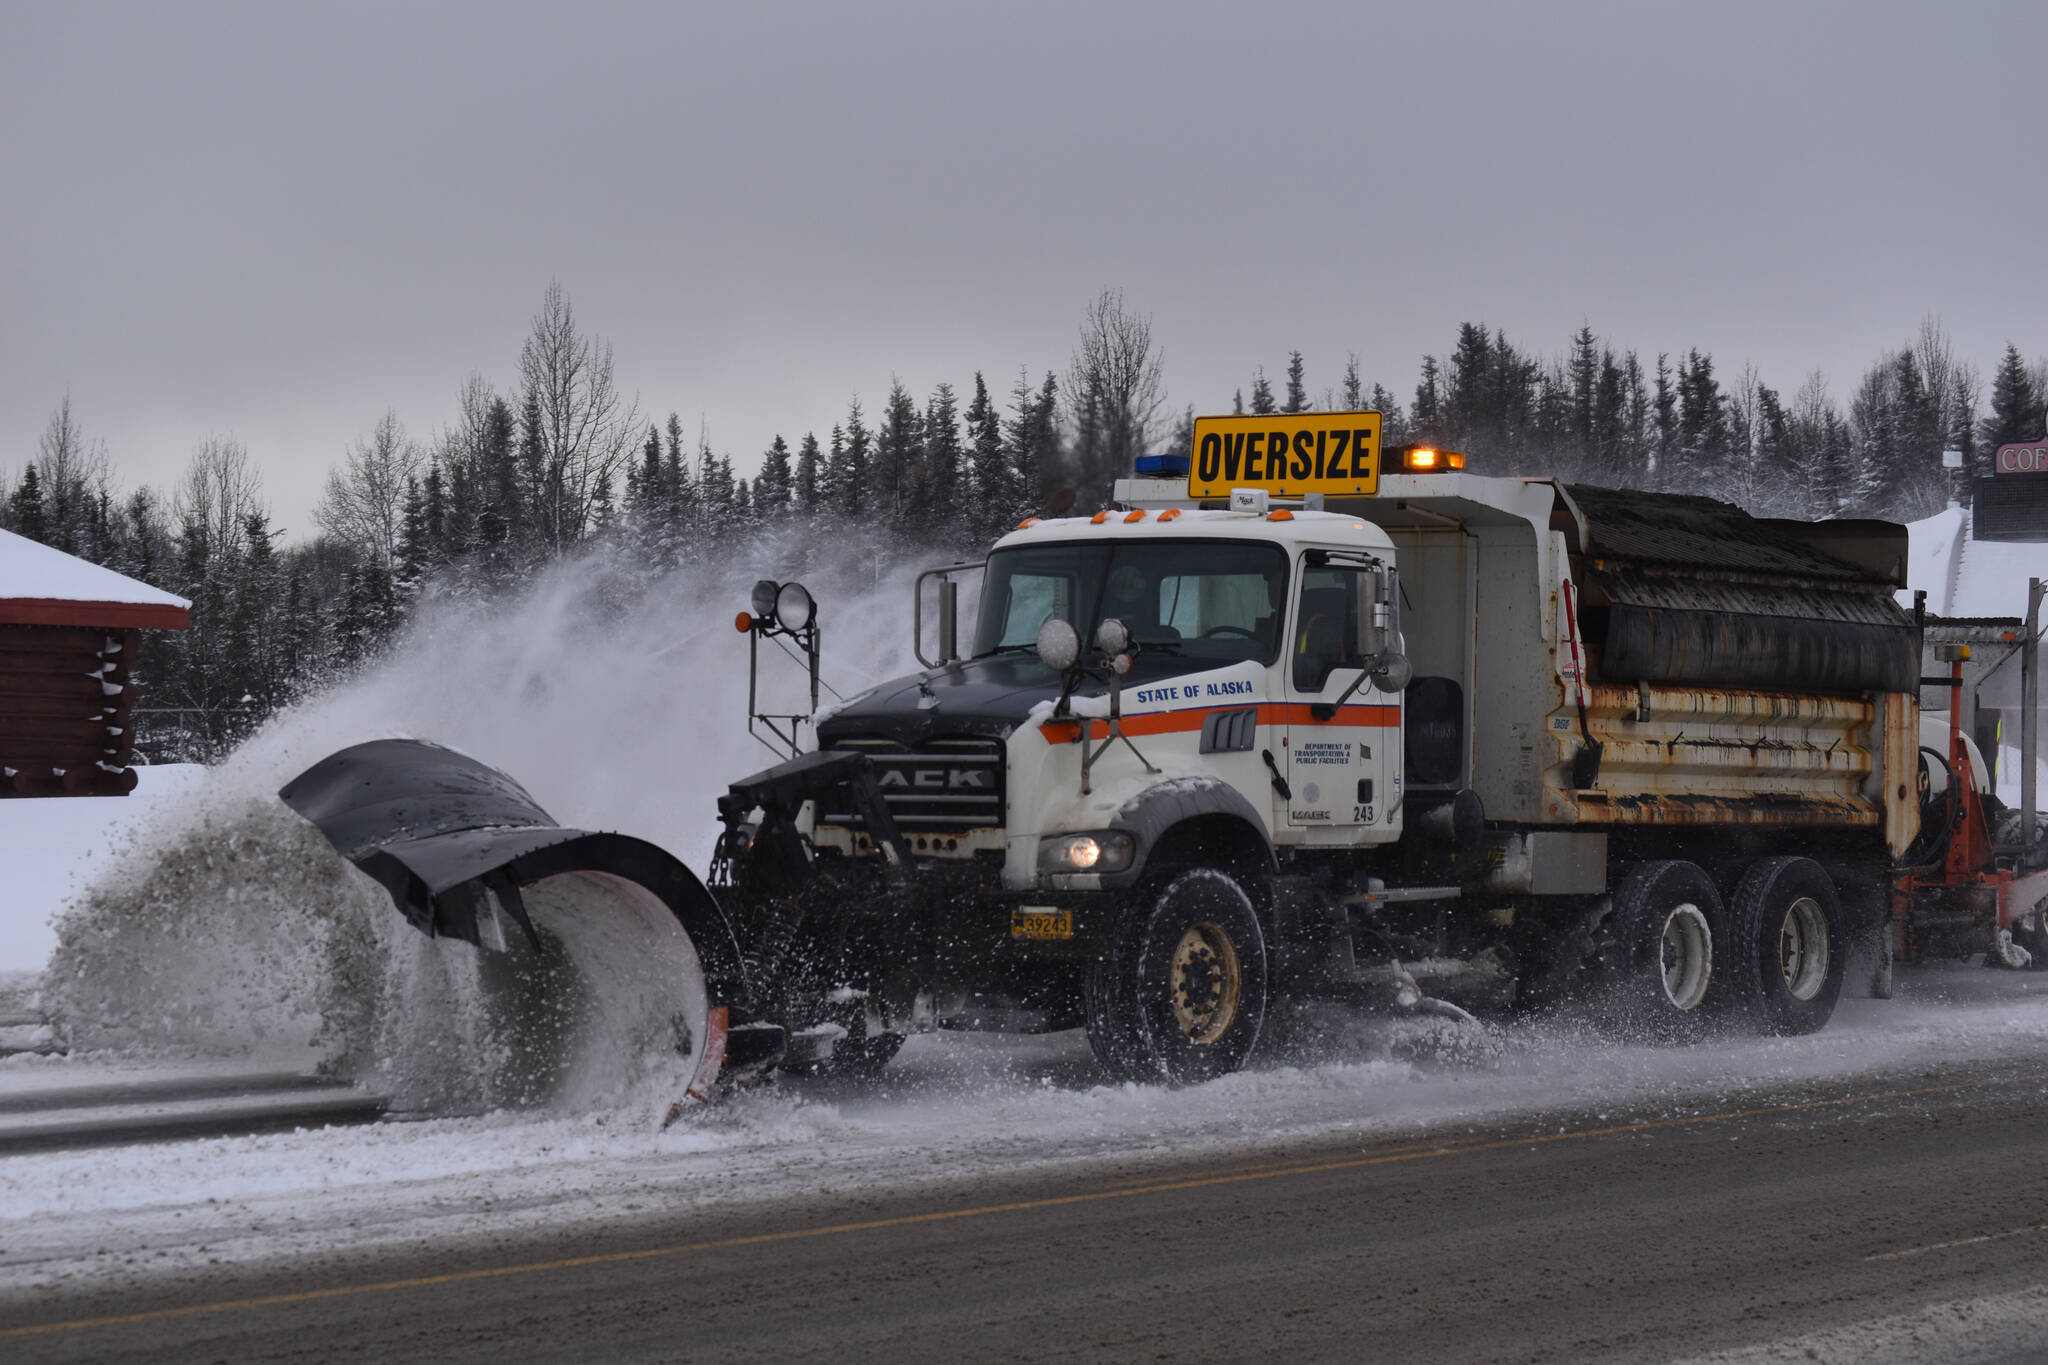 A plow truck clears snow from the Kenai Spur Highway on Wednesday, Nov. 2, 2022 in Kenai, Alaska. (Jake Dye/Peninsula Clarion)